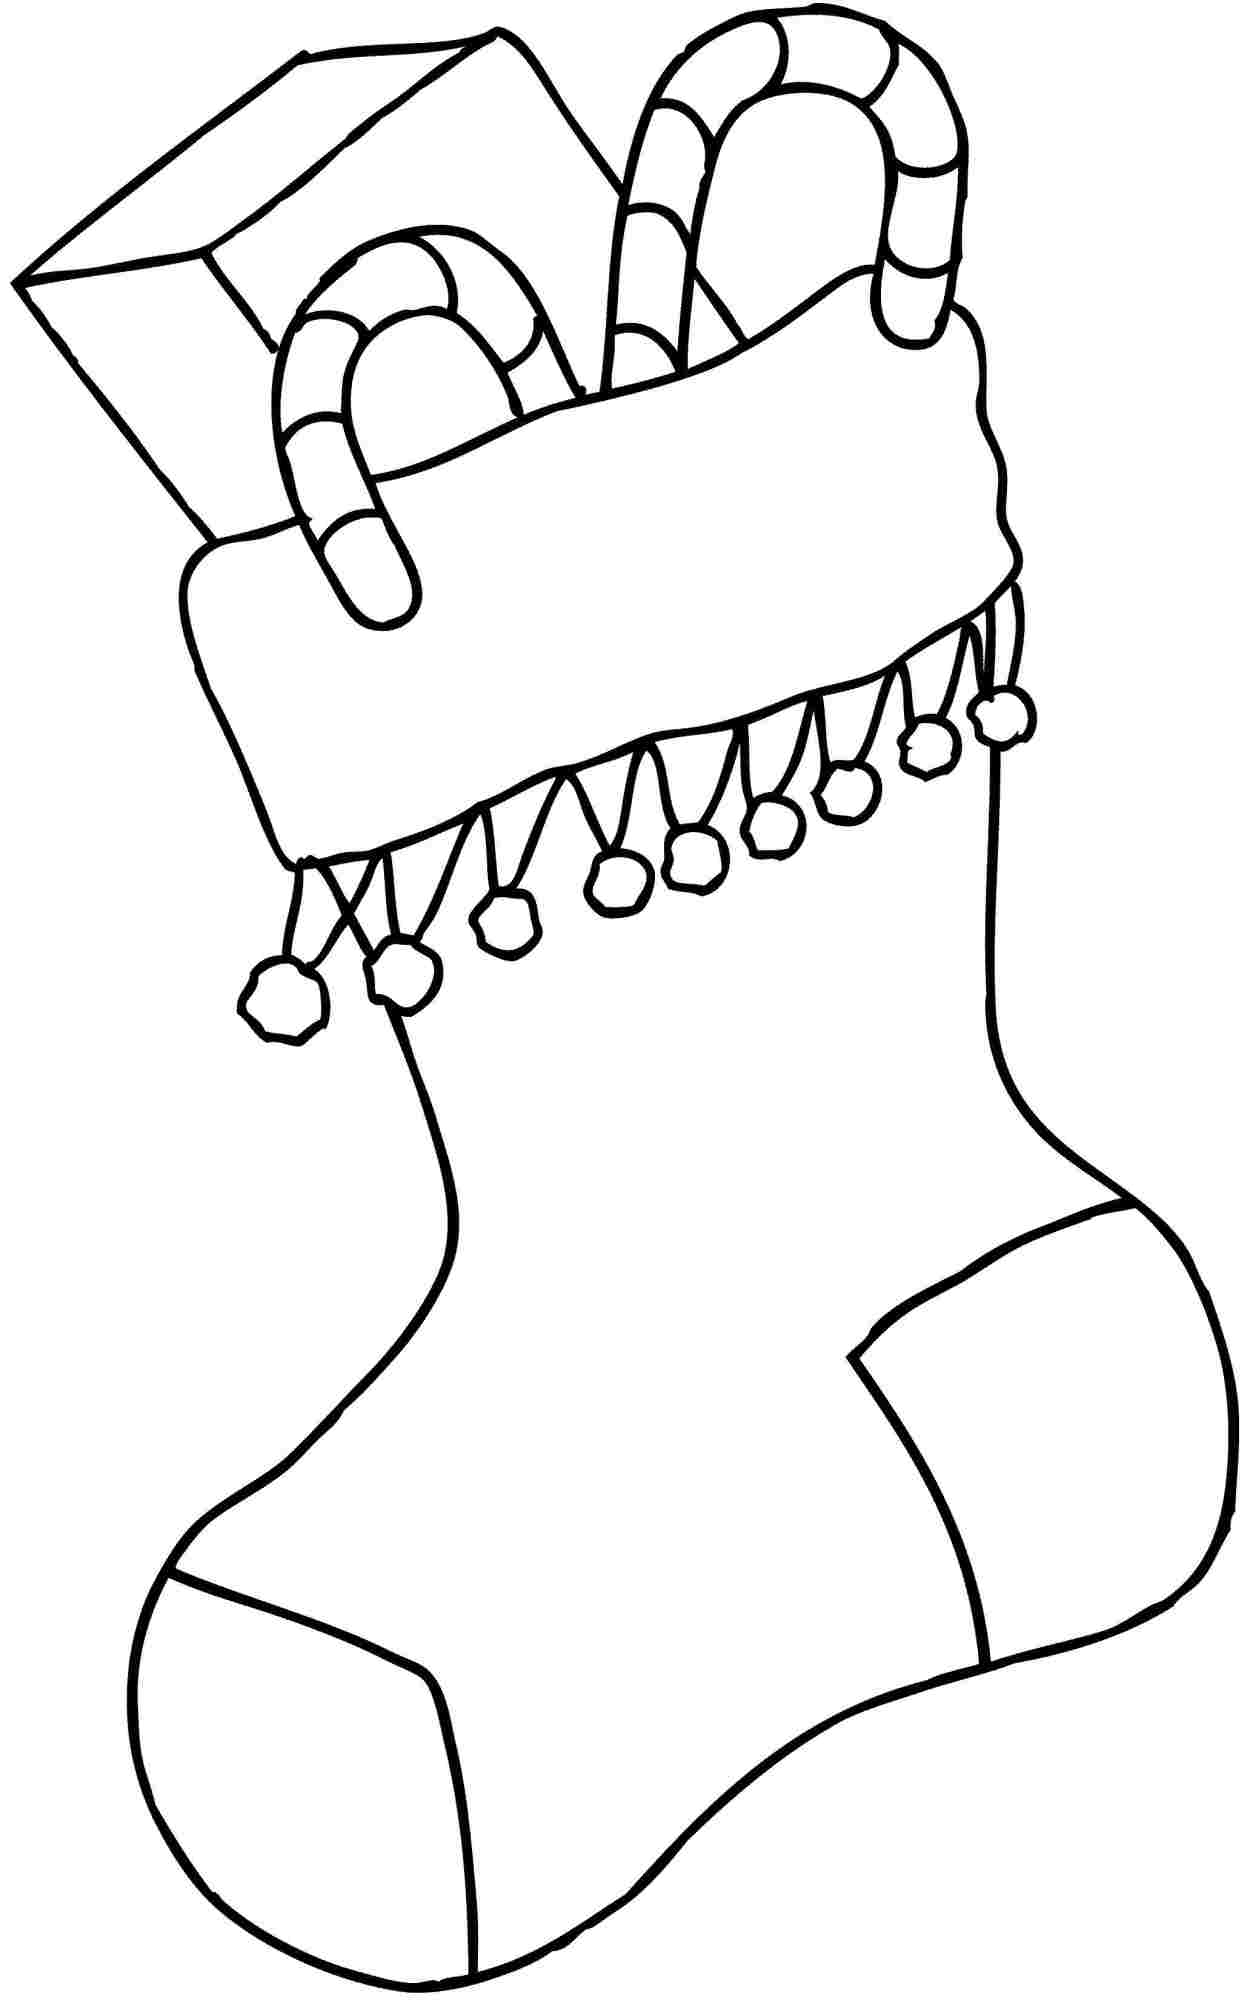 Christmas Toys Coloring Pages Coloring Pages Christmas Stocking Pictures To Print Printable